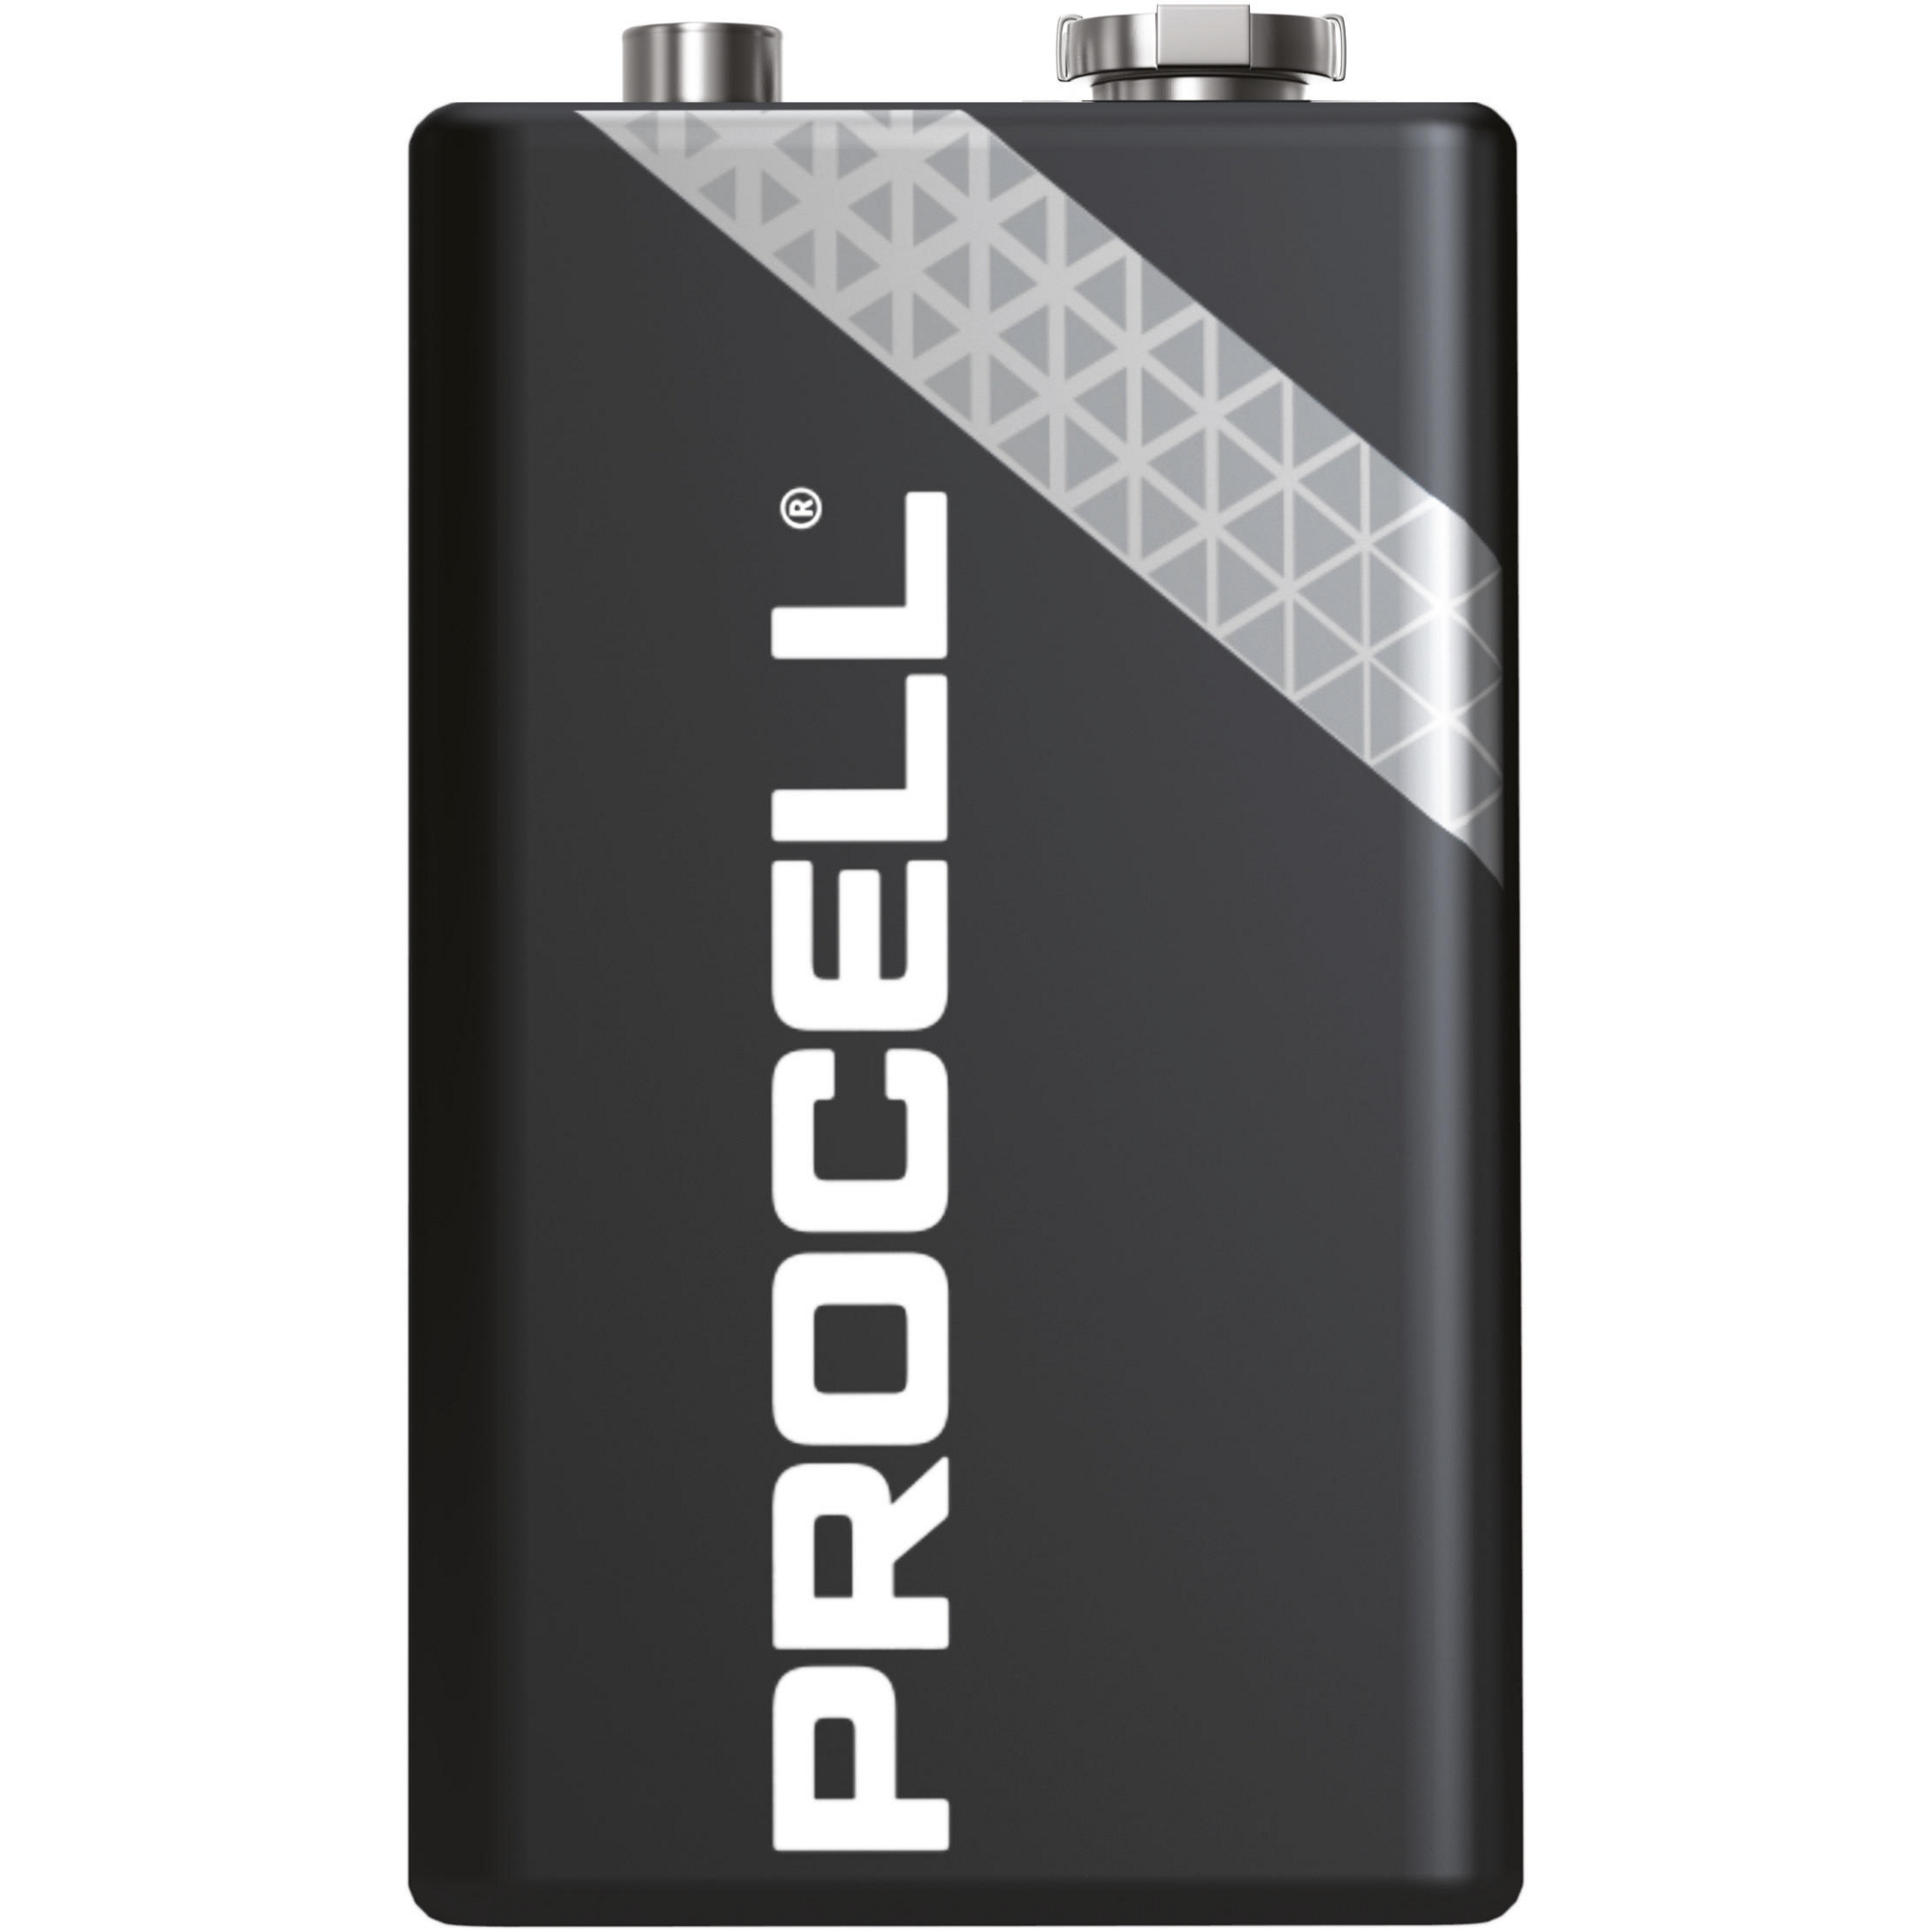 Duracell Procell 9v Batteries